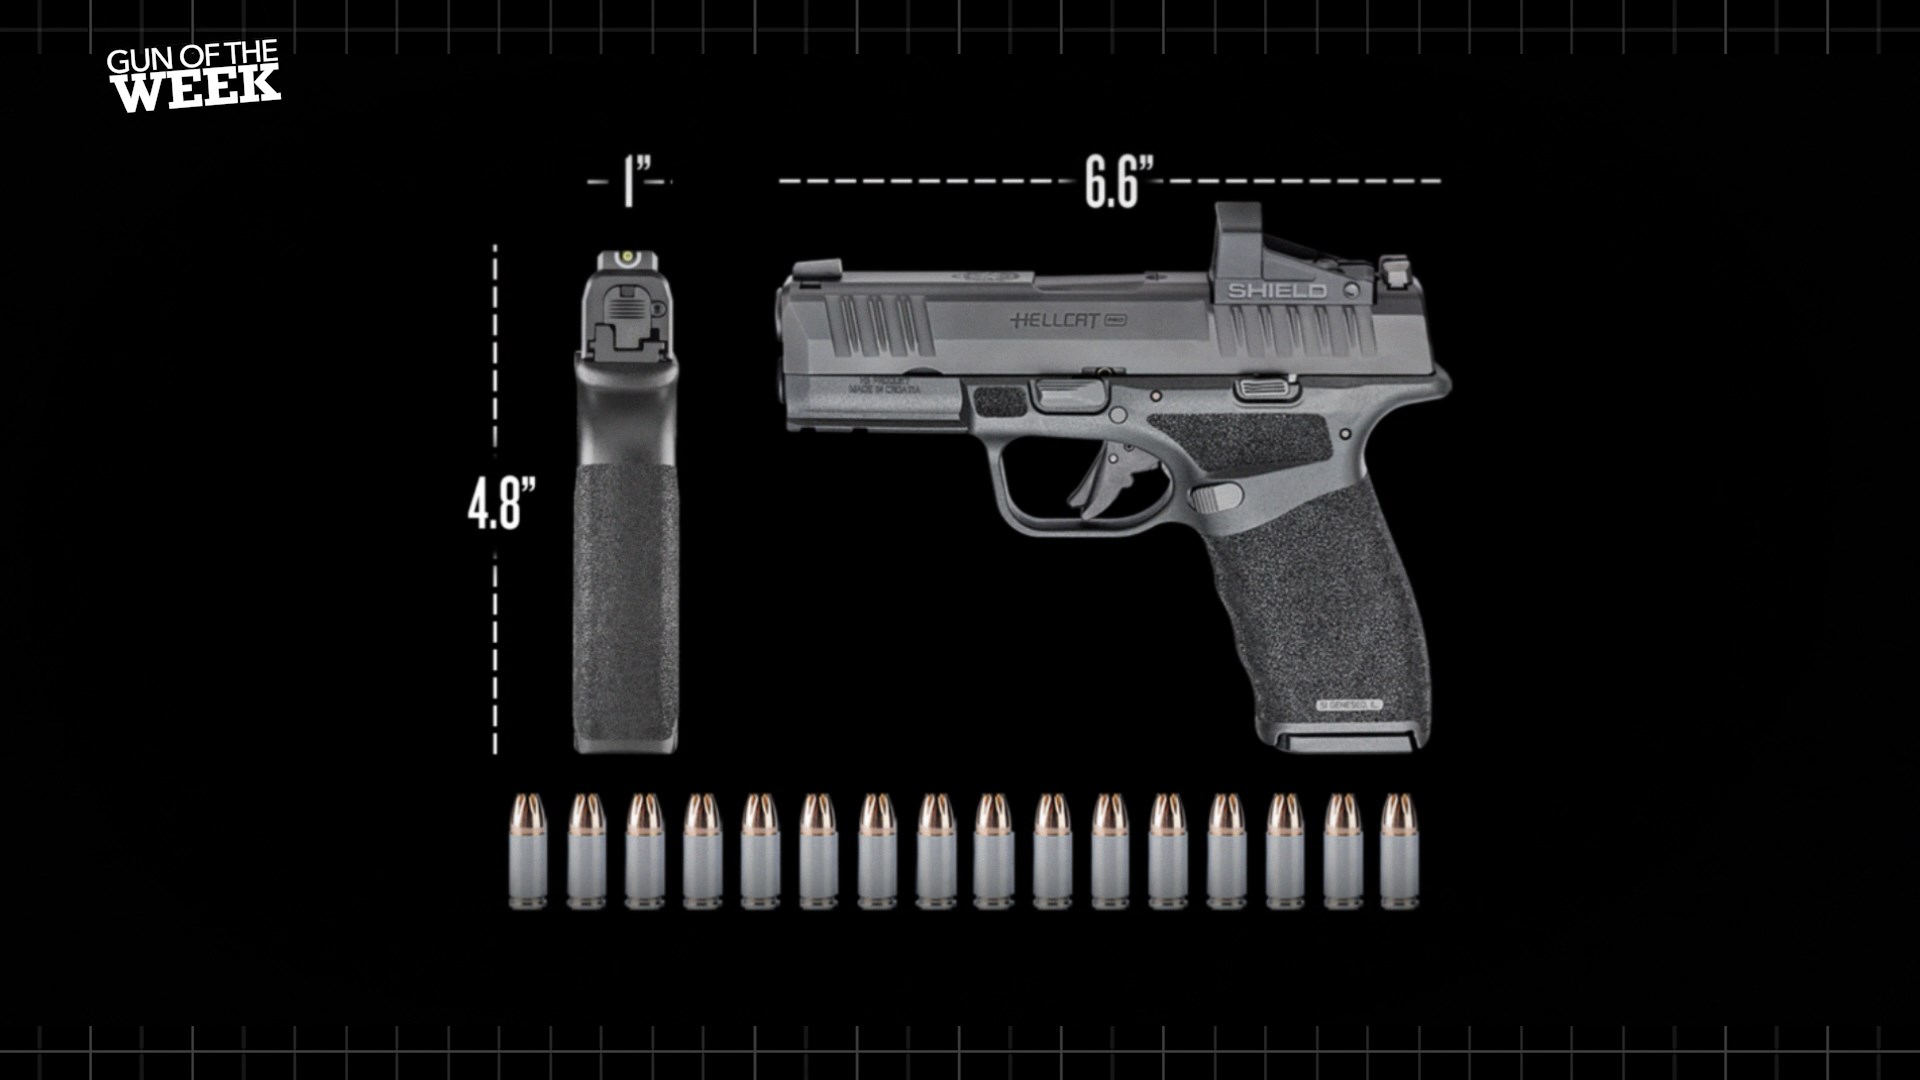 GUN OF THE WEEK text on image showing pistol size and magazie capacity